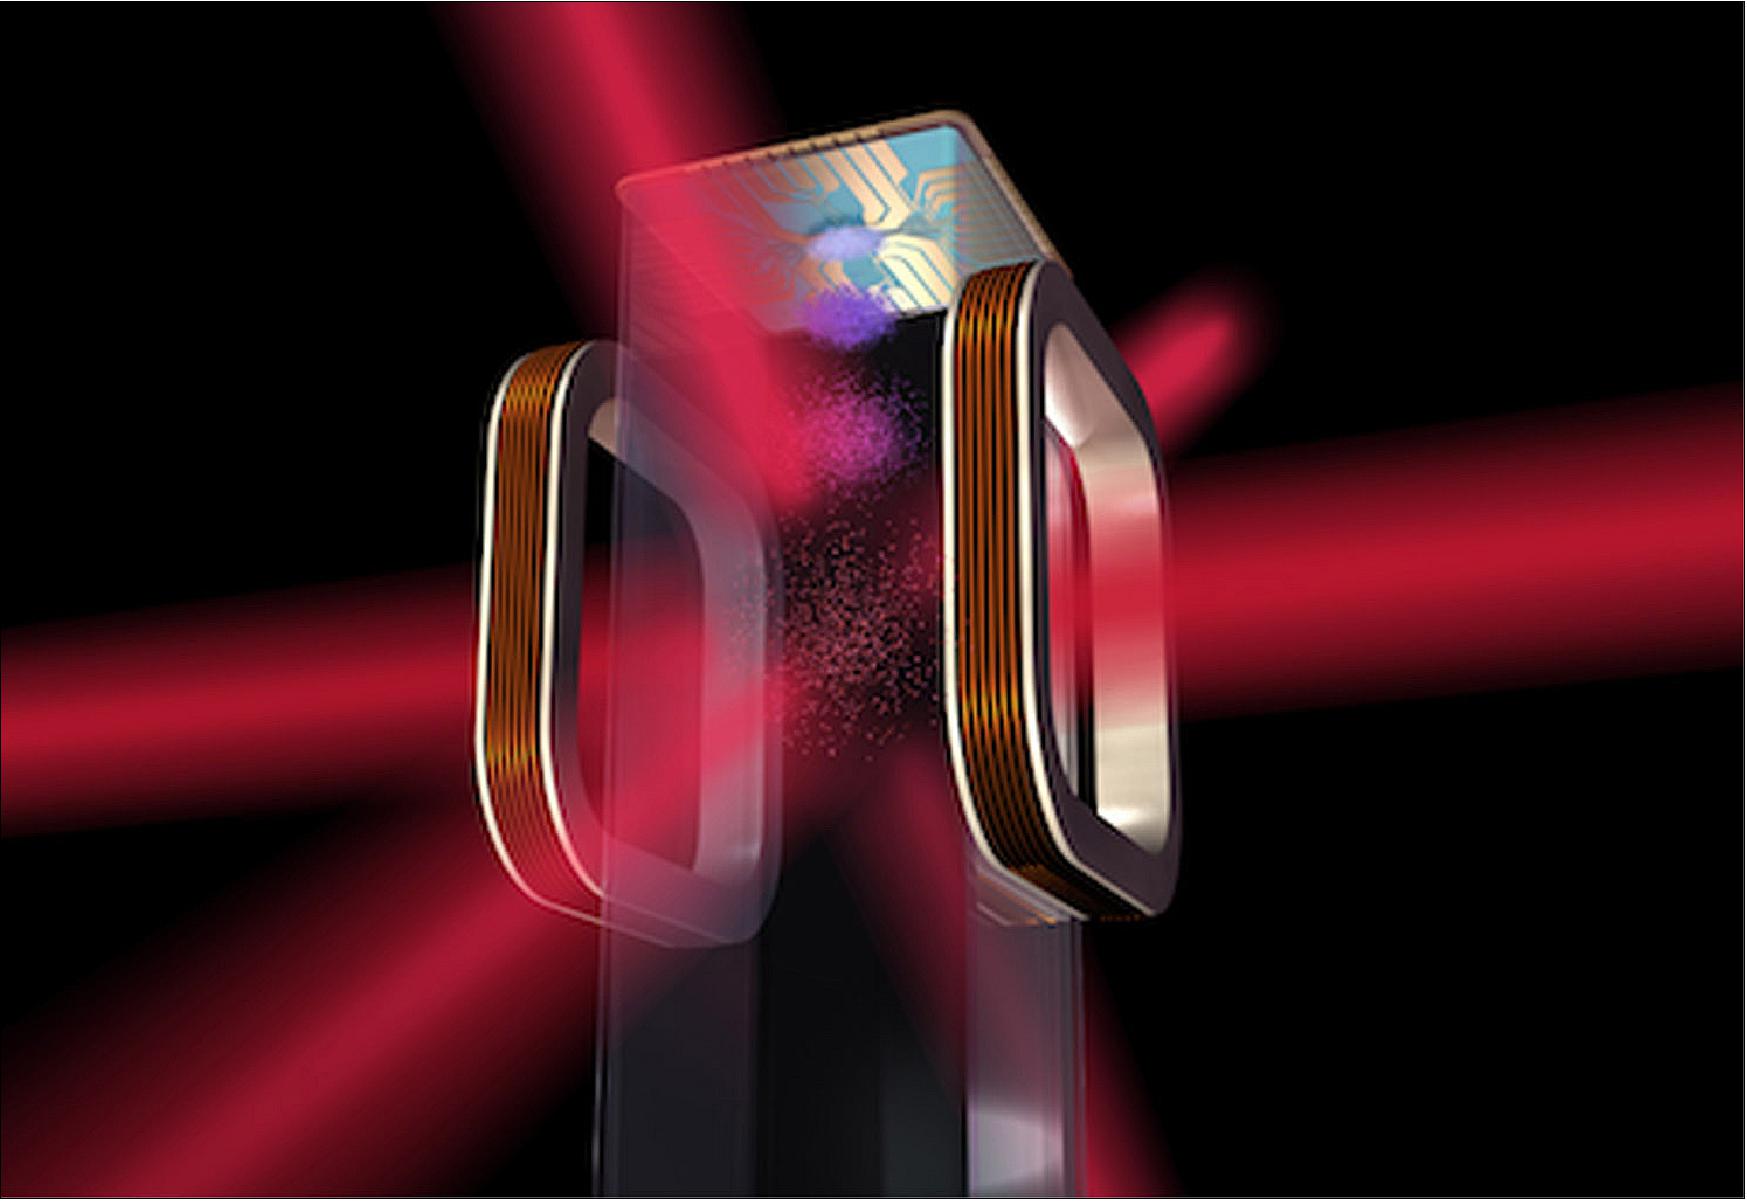 Figure 12: Artist's concept of a magneto-optical trap and atom chip to be used by NASA's Cold Atom Laboratory (CAL) aboard the ISS (image credit: NASA/JPL, Ref. 7)